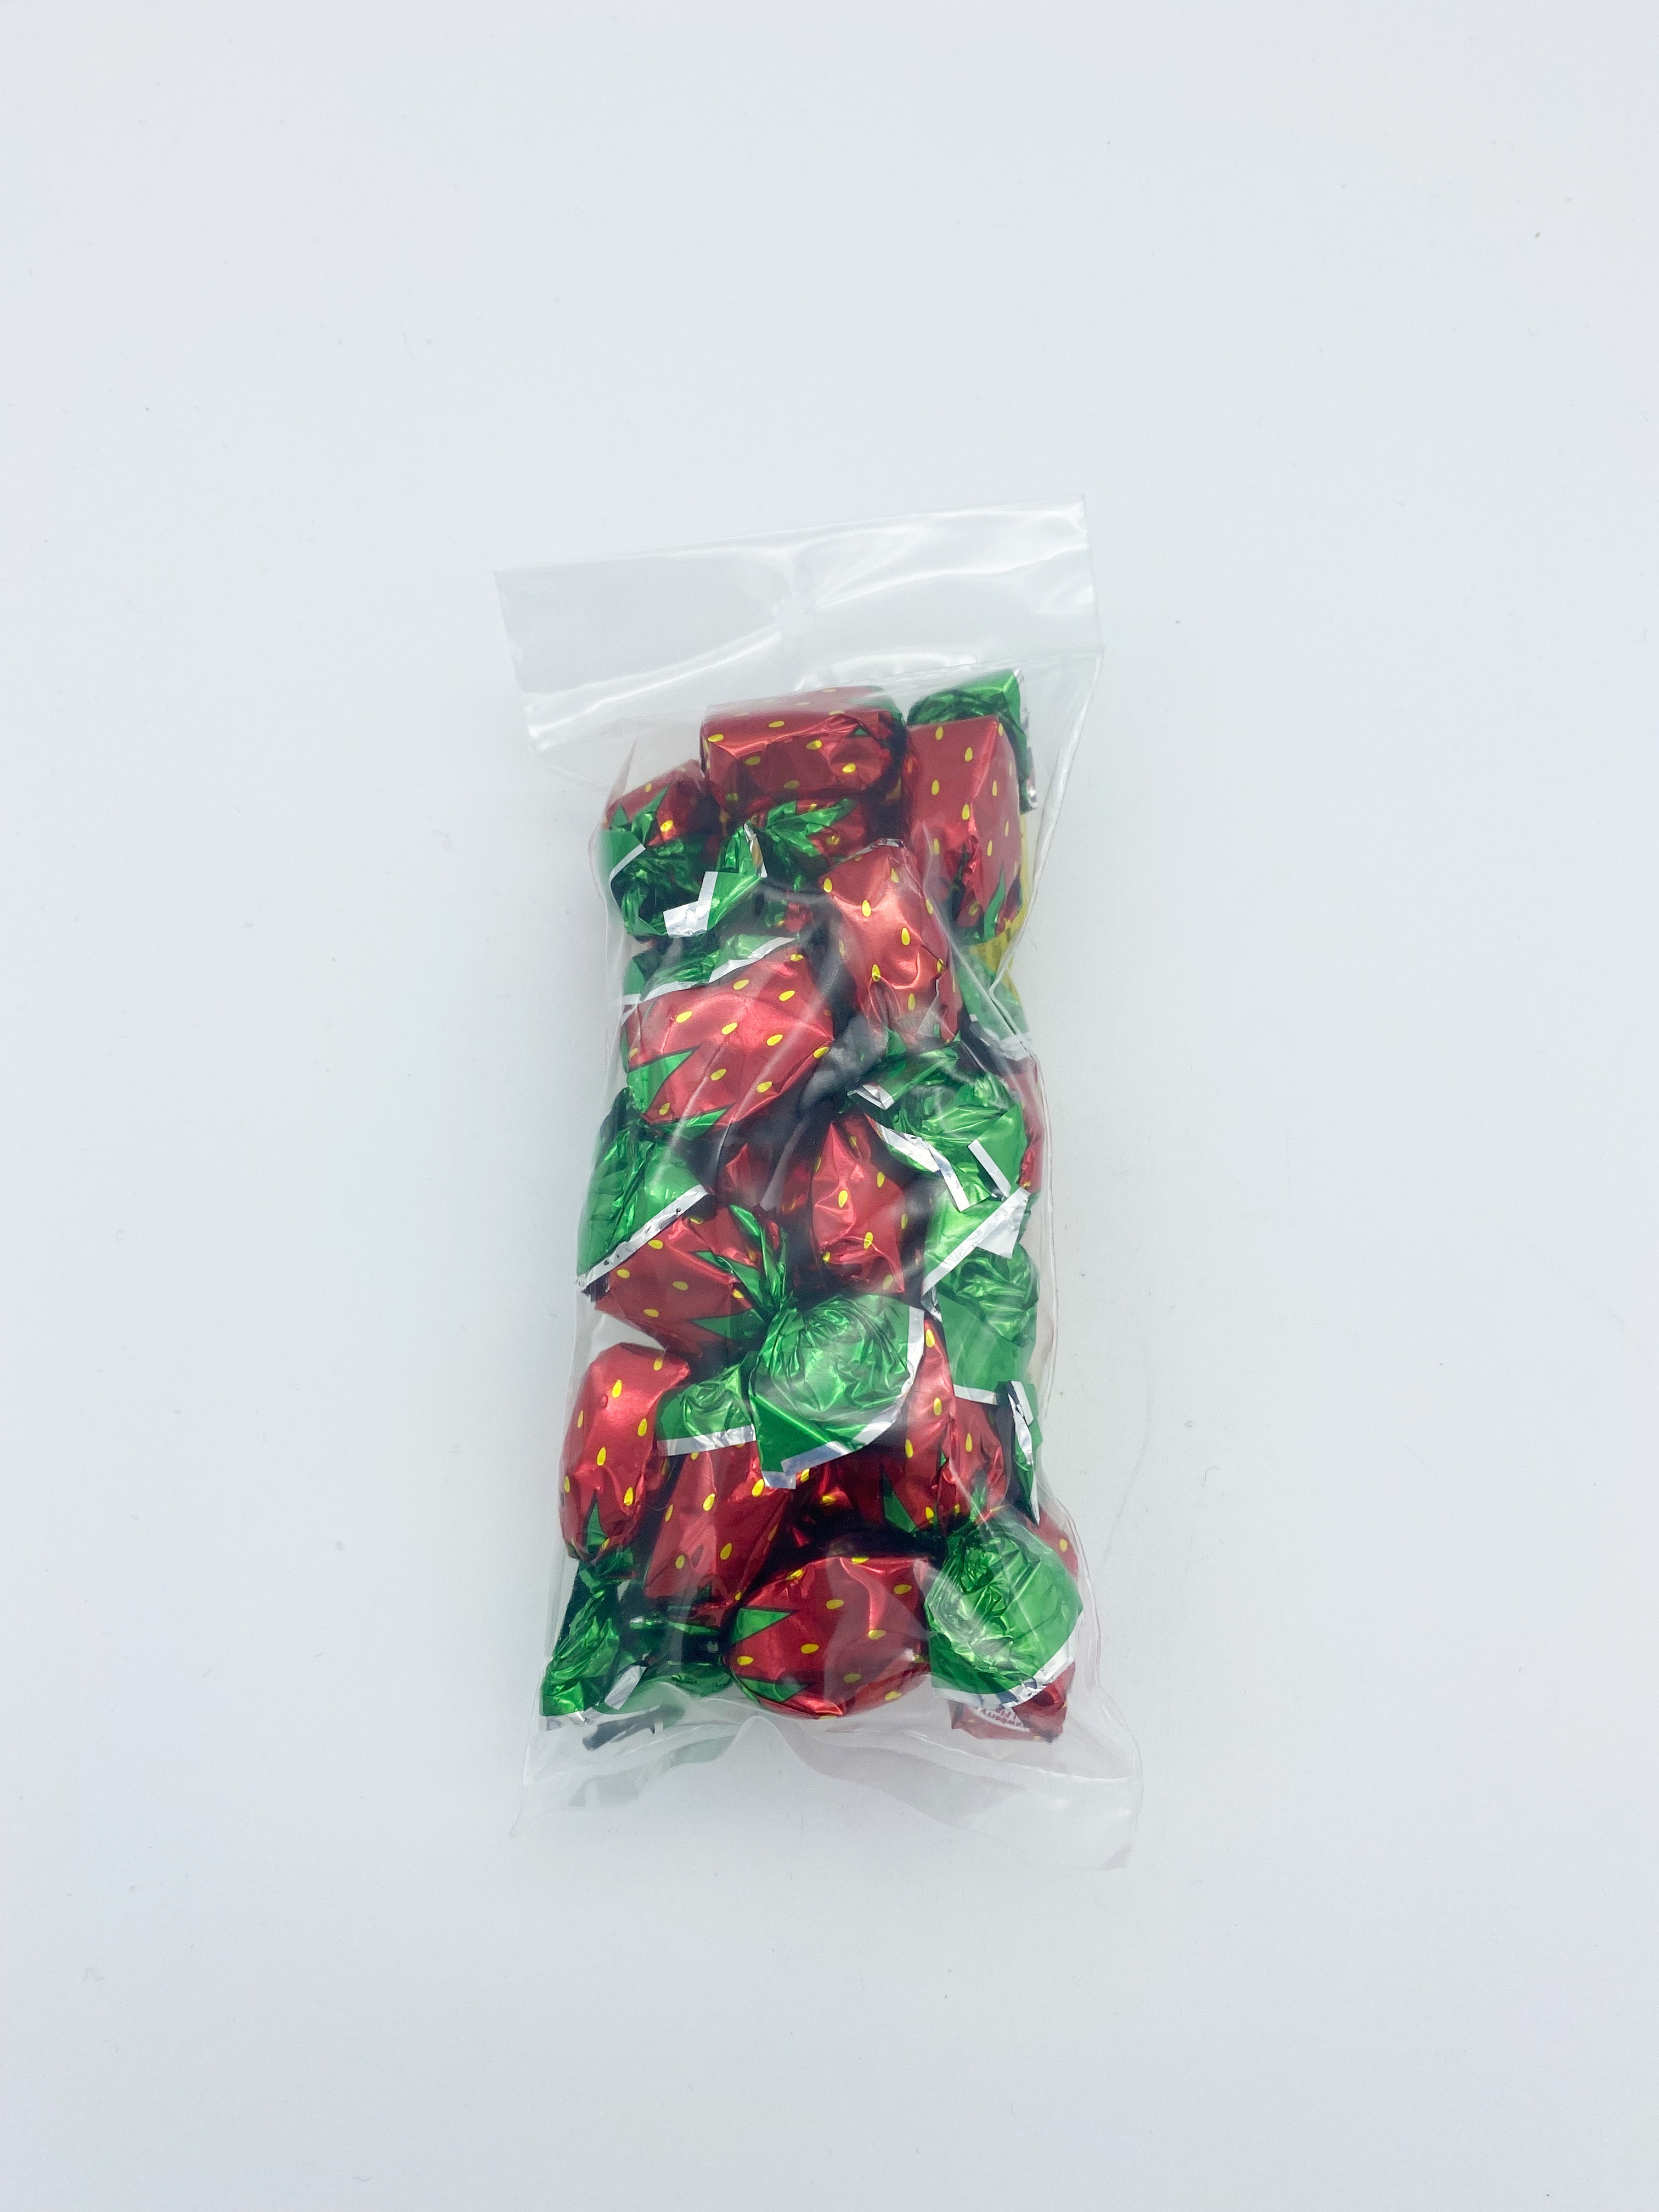 STRAWBERRY FILLED HARD CANDY